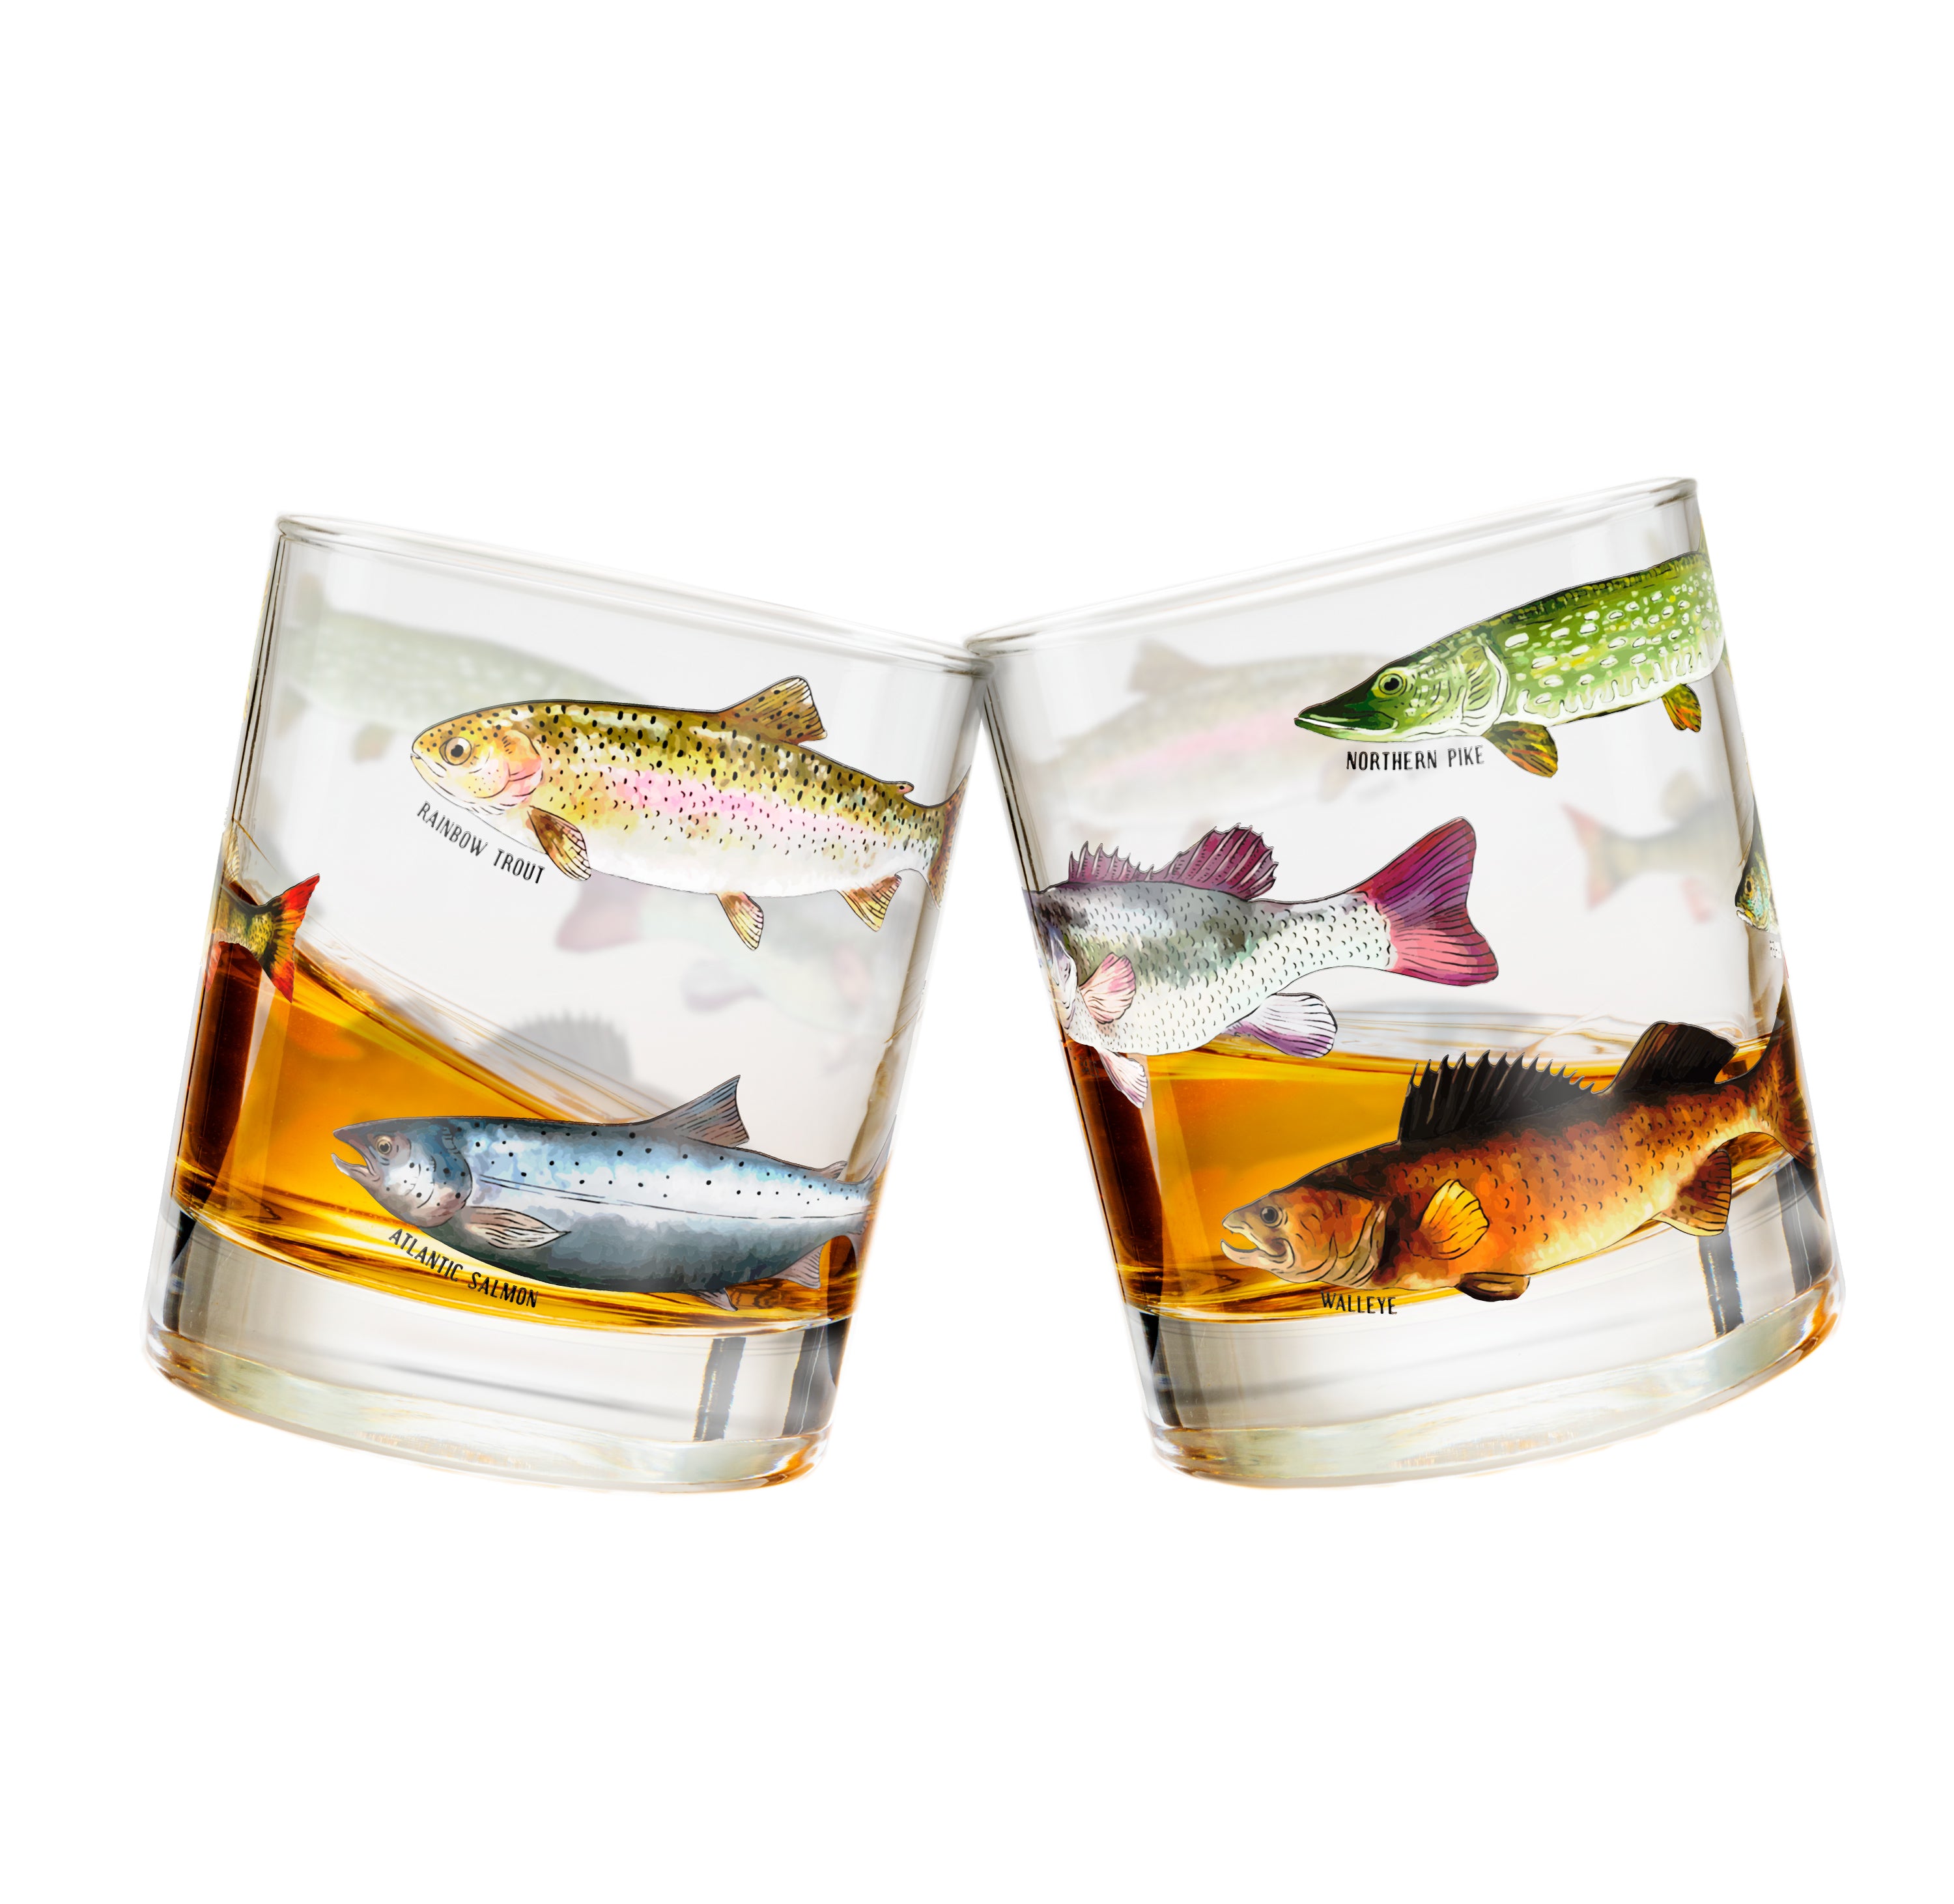 Fishing Lure Tumbler Whiskey Scotch Glass 11 oz. | Novelty Old Fashioned  Whiskey Glasses | Classic Lowball Rocks Glass | Retirement Gifts